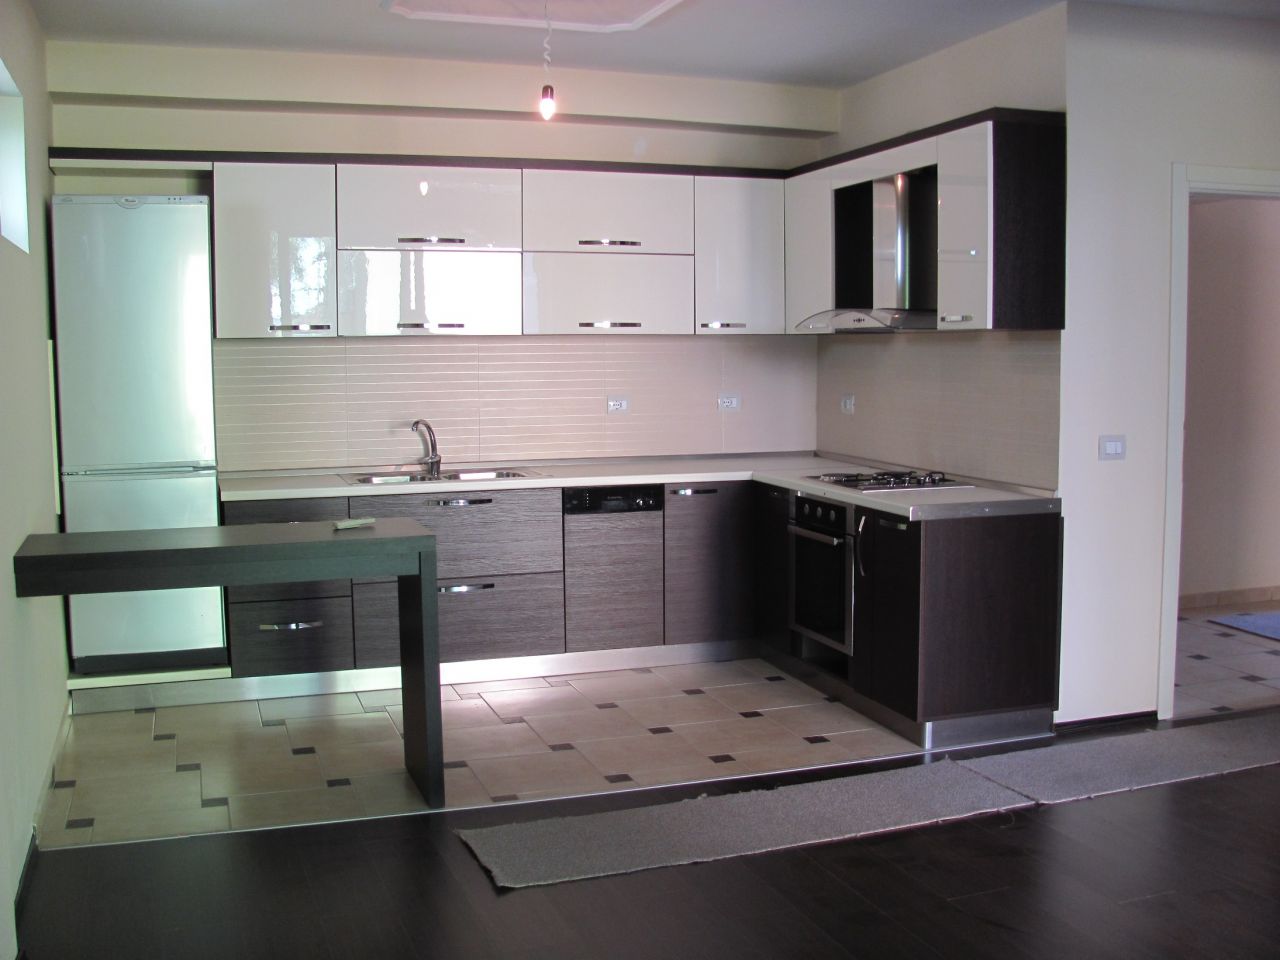 Villa for Rent in Tirana, Albania. The villa has two floors and is in very good conditions. 